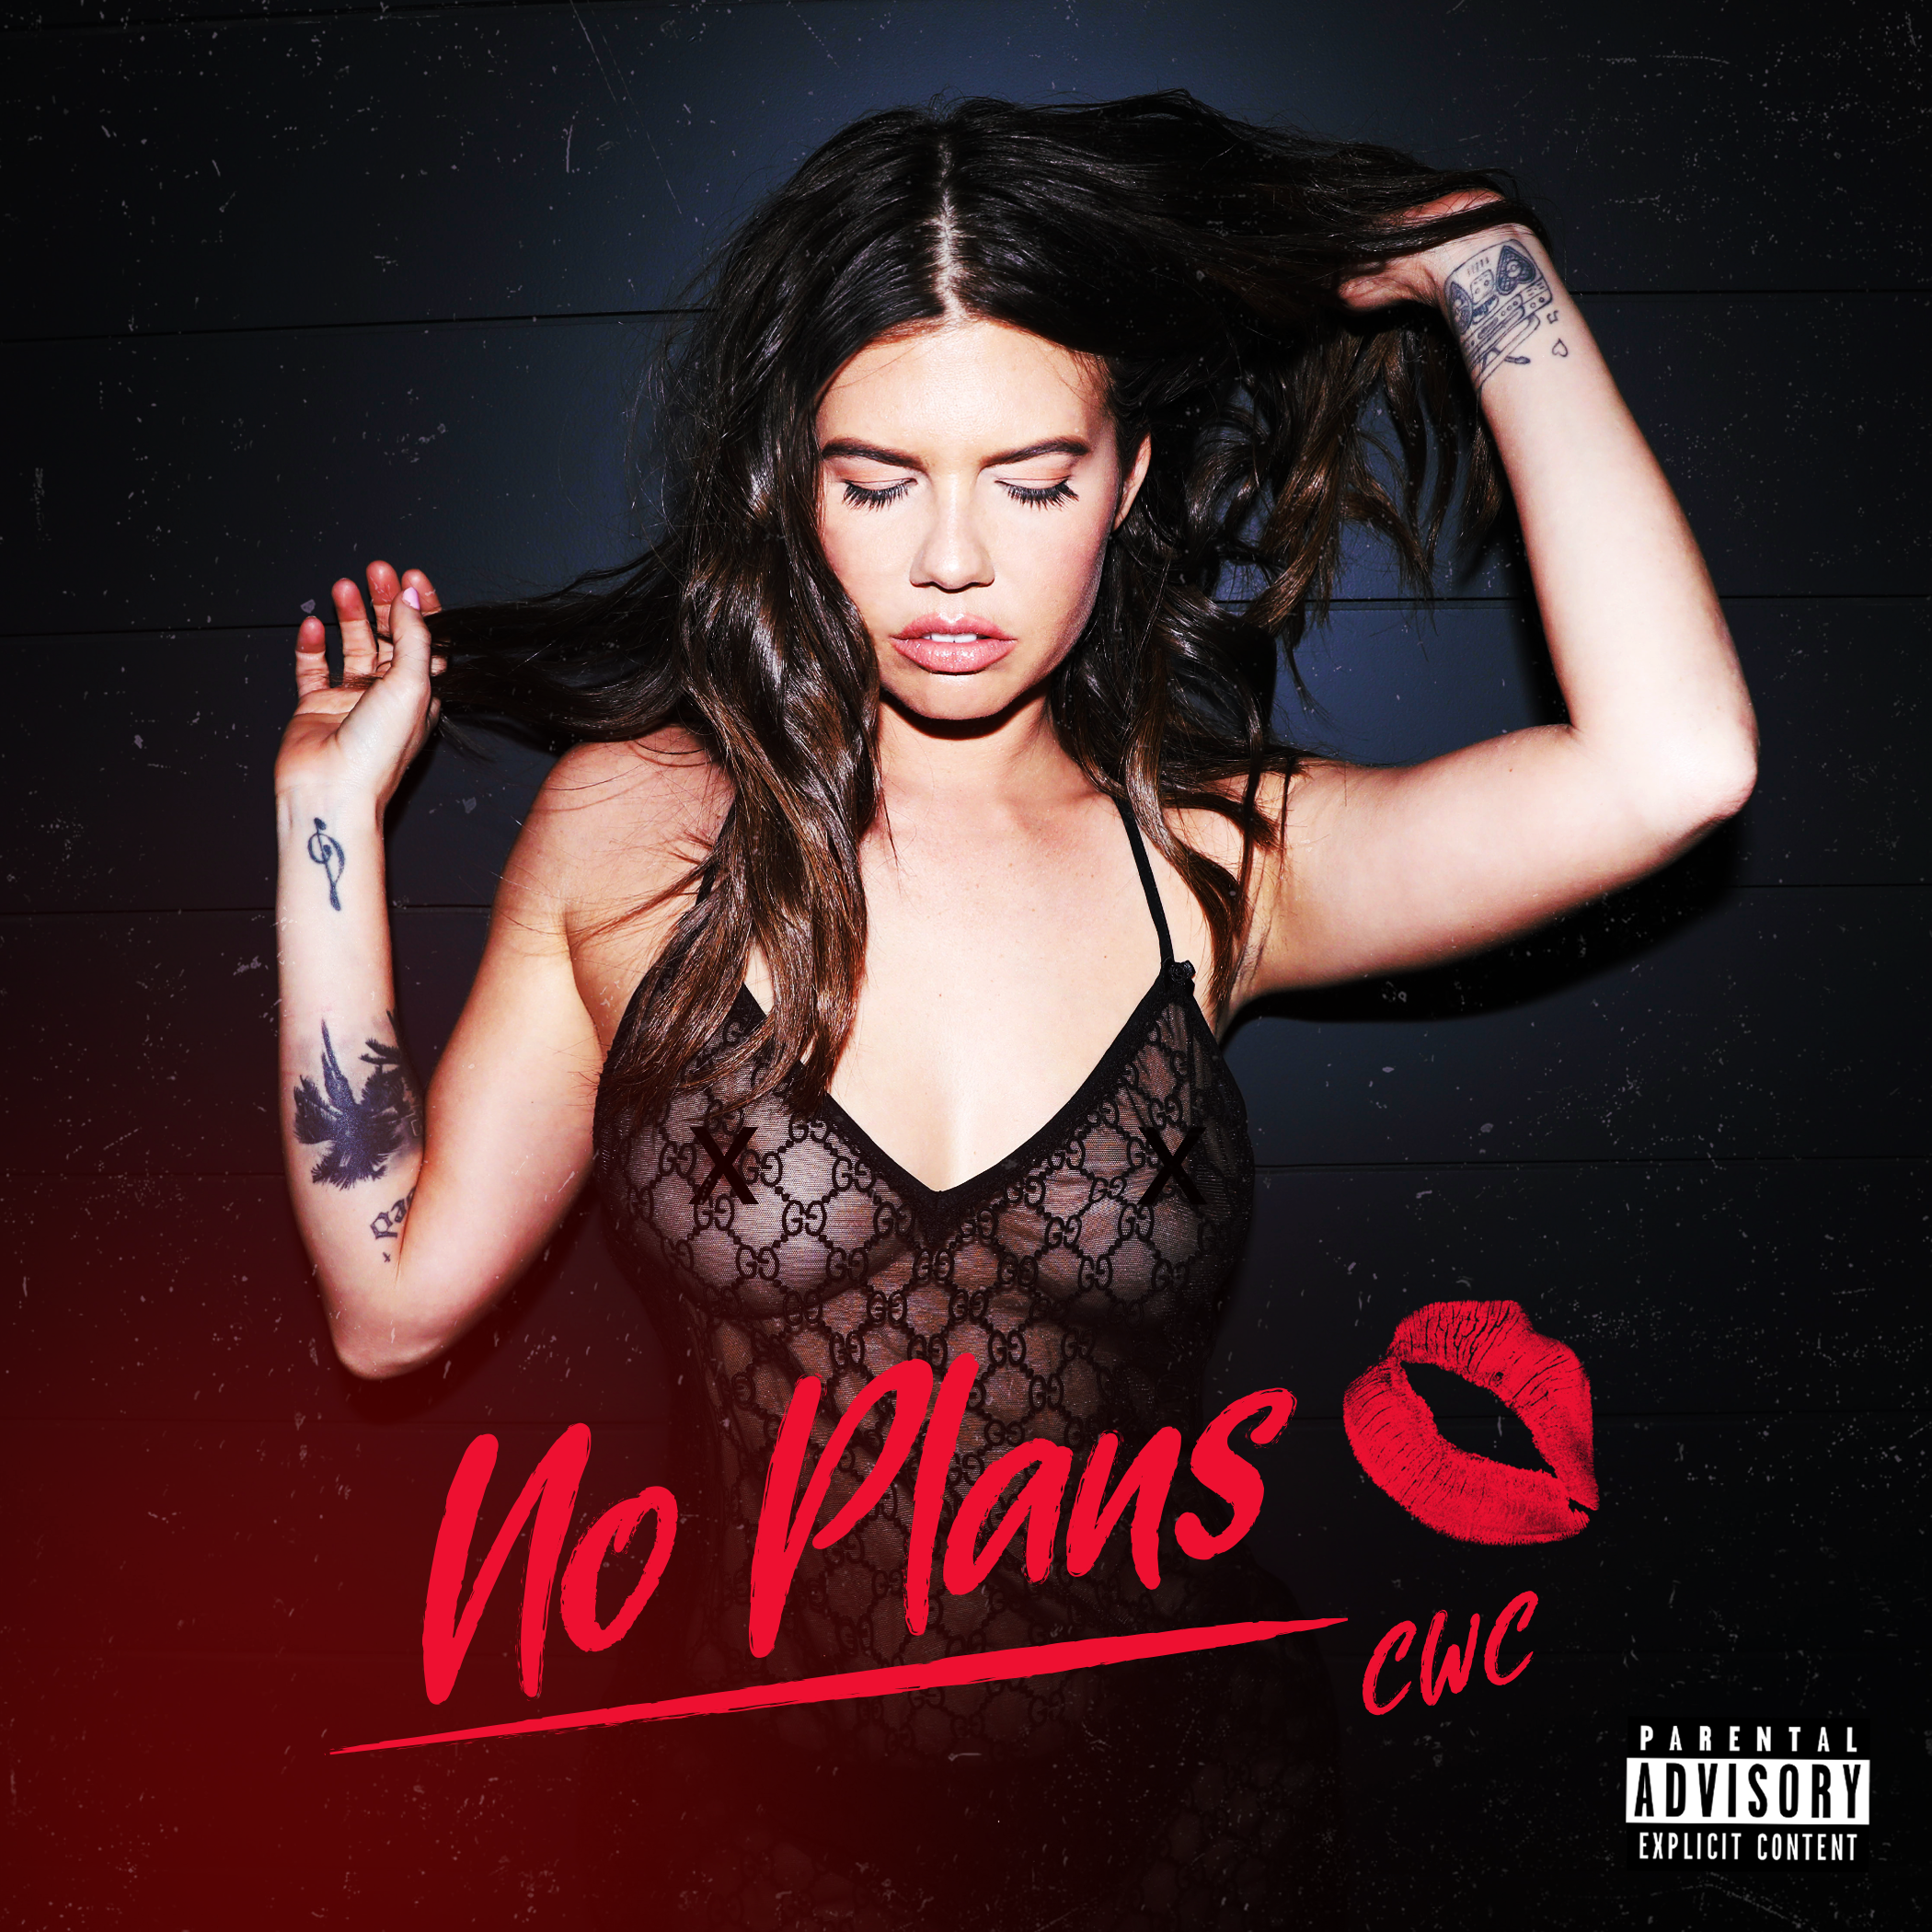 Chanel West Coast See Through on No Plans Cover! 